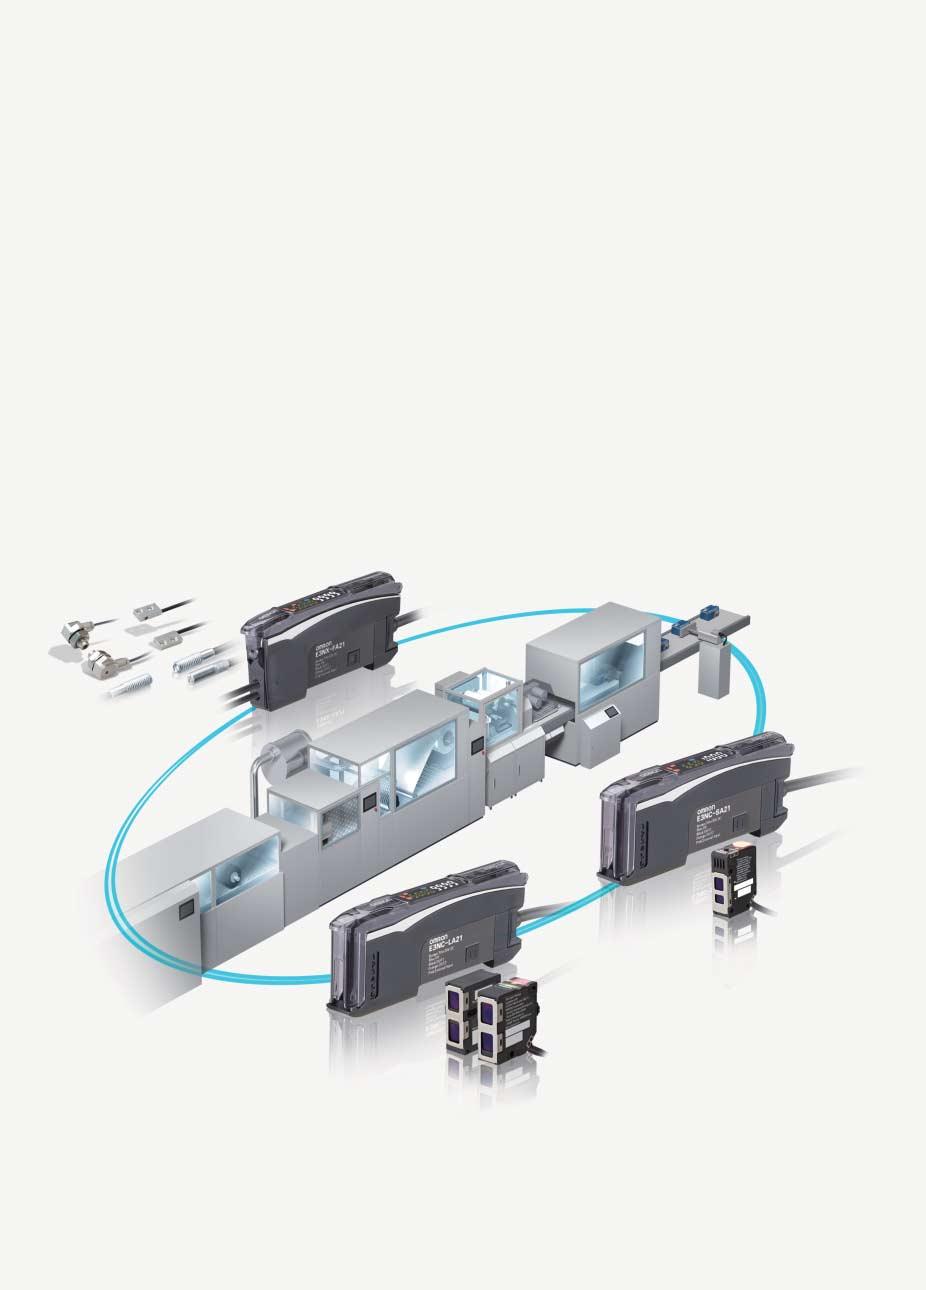 Presence Detection Measurement Simpler and More Dependable The N-Smart Lineup of Next-generation Fiber Sensors and Laser Sensors will quickly solve your problems and therefore increase equipment